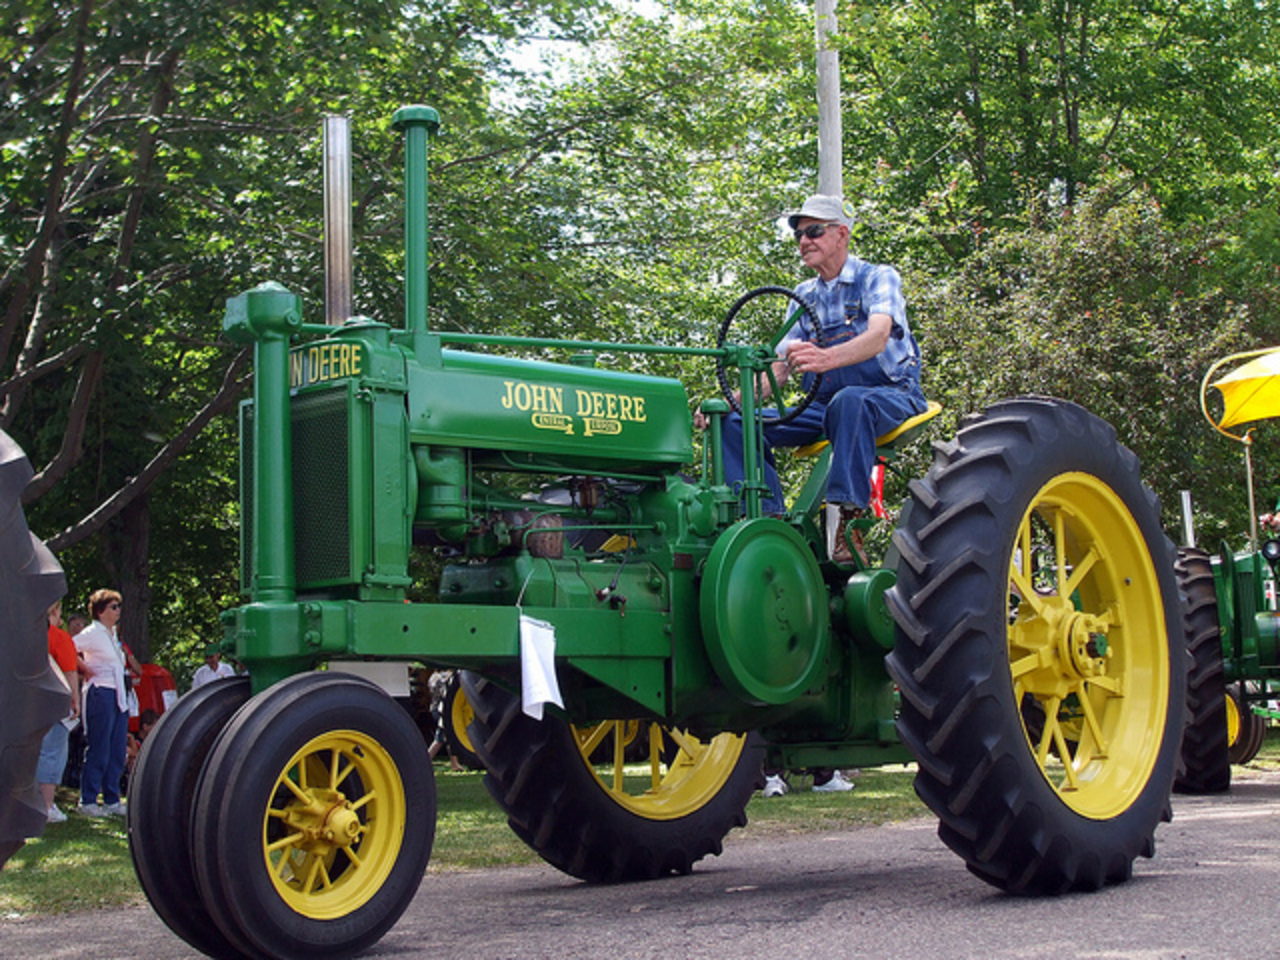 John Deere General Purpose In The Tractor Parade | Flickr - Photo ...